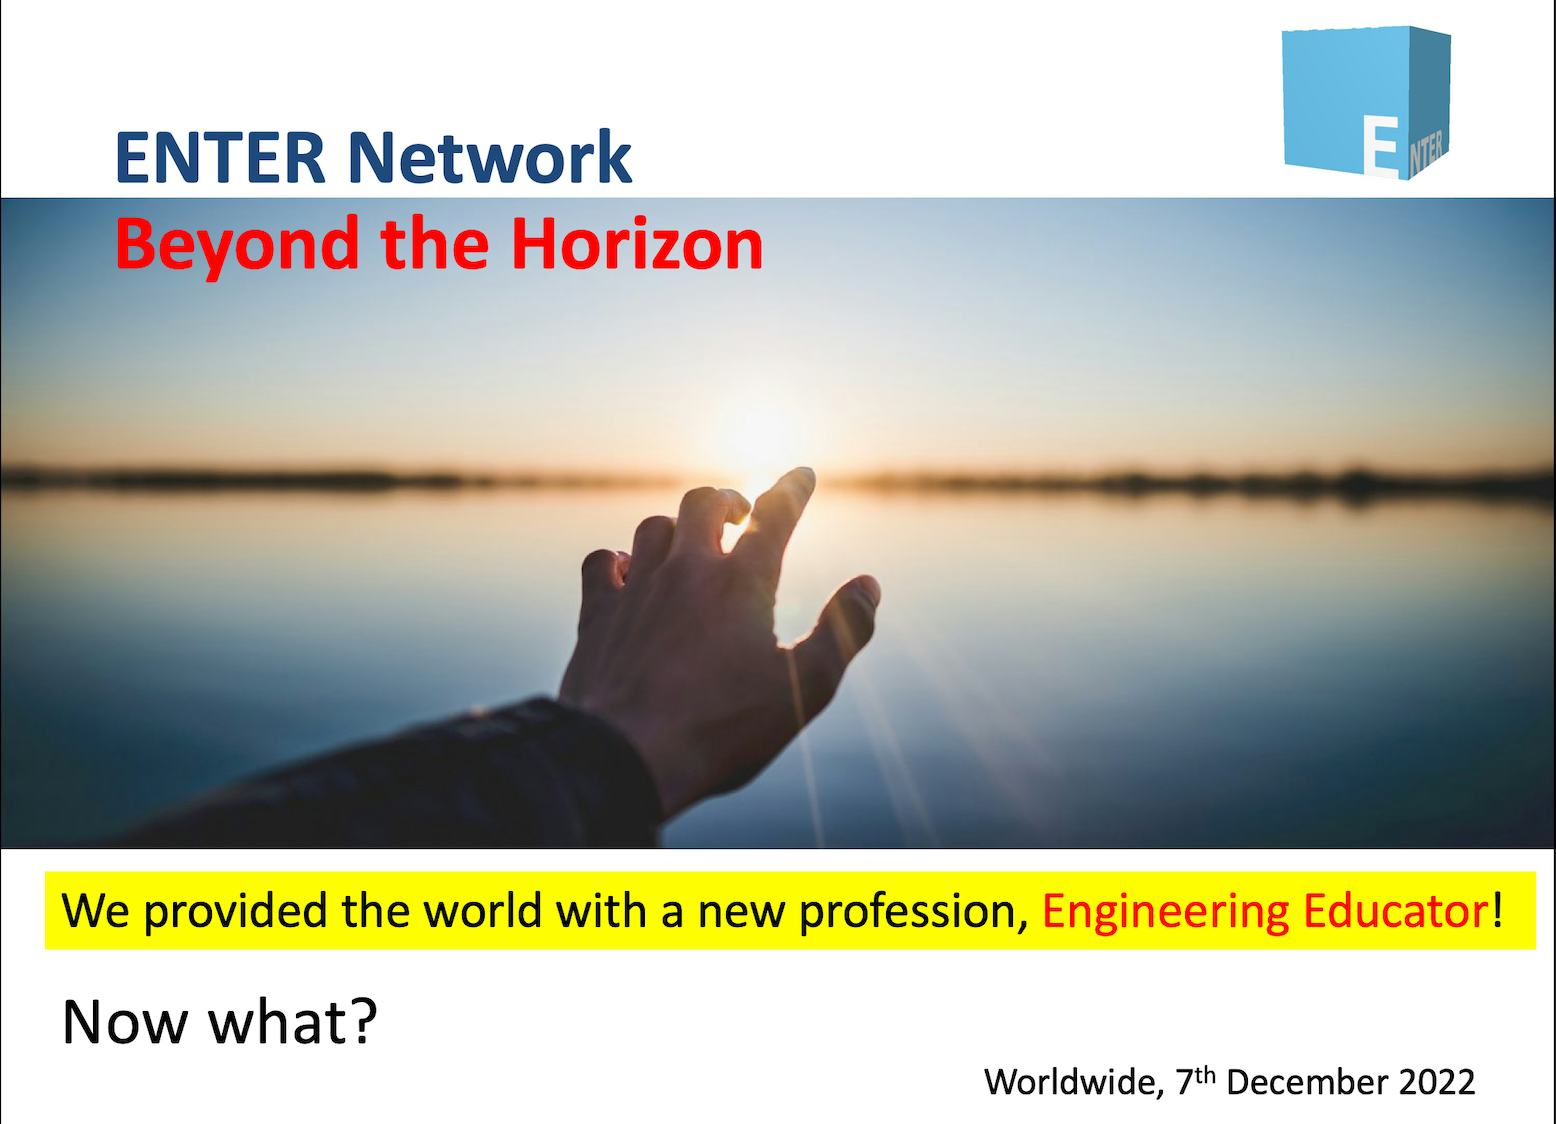  “ENTER Network Beyond the Horizon”  - online meeting held to discuss current achievements and outline future activities 